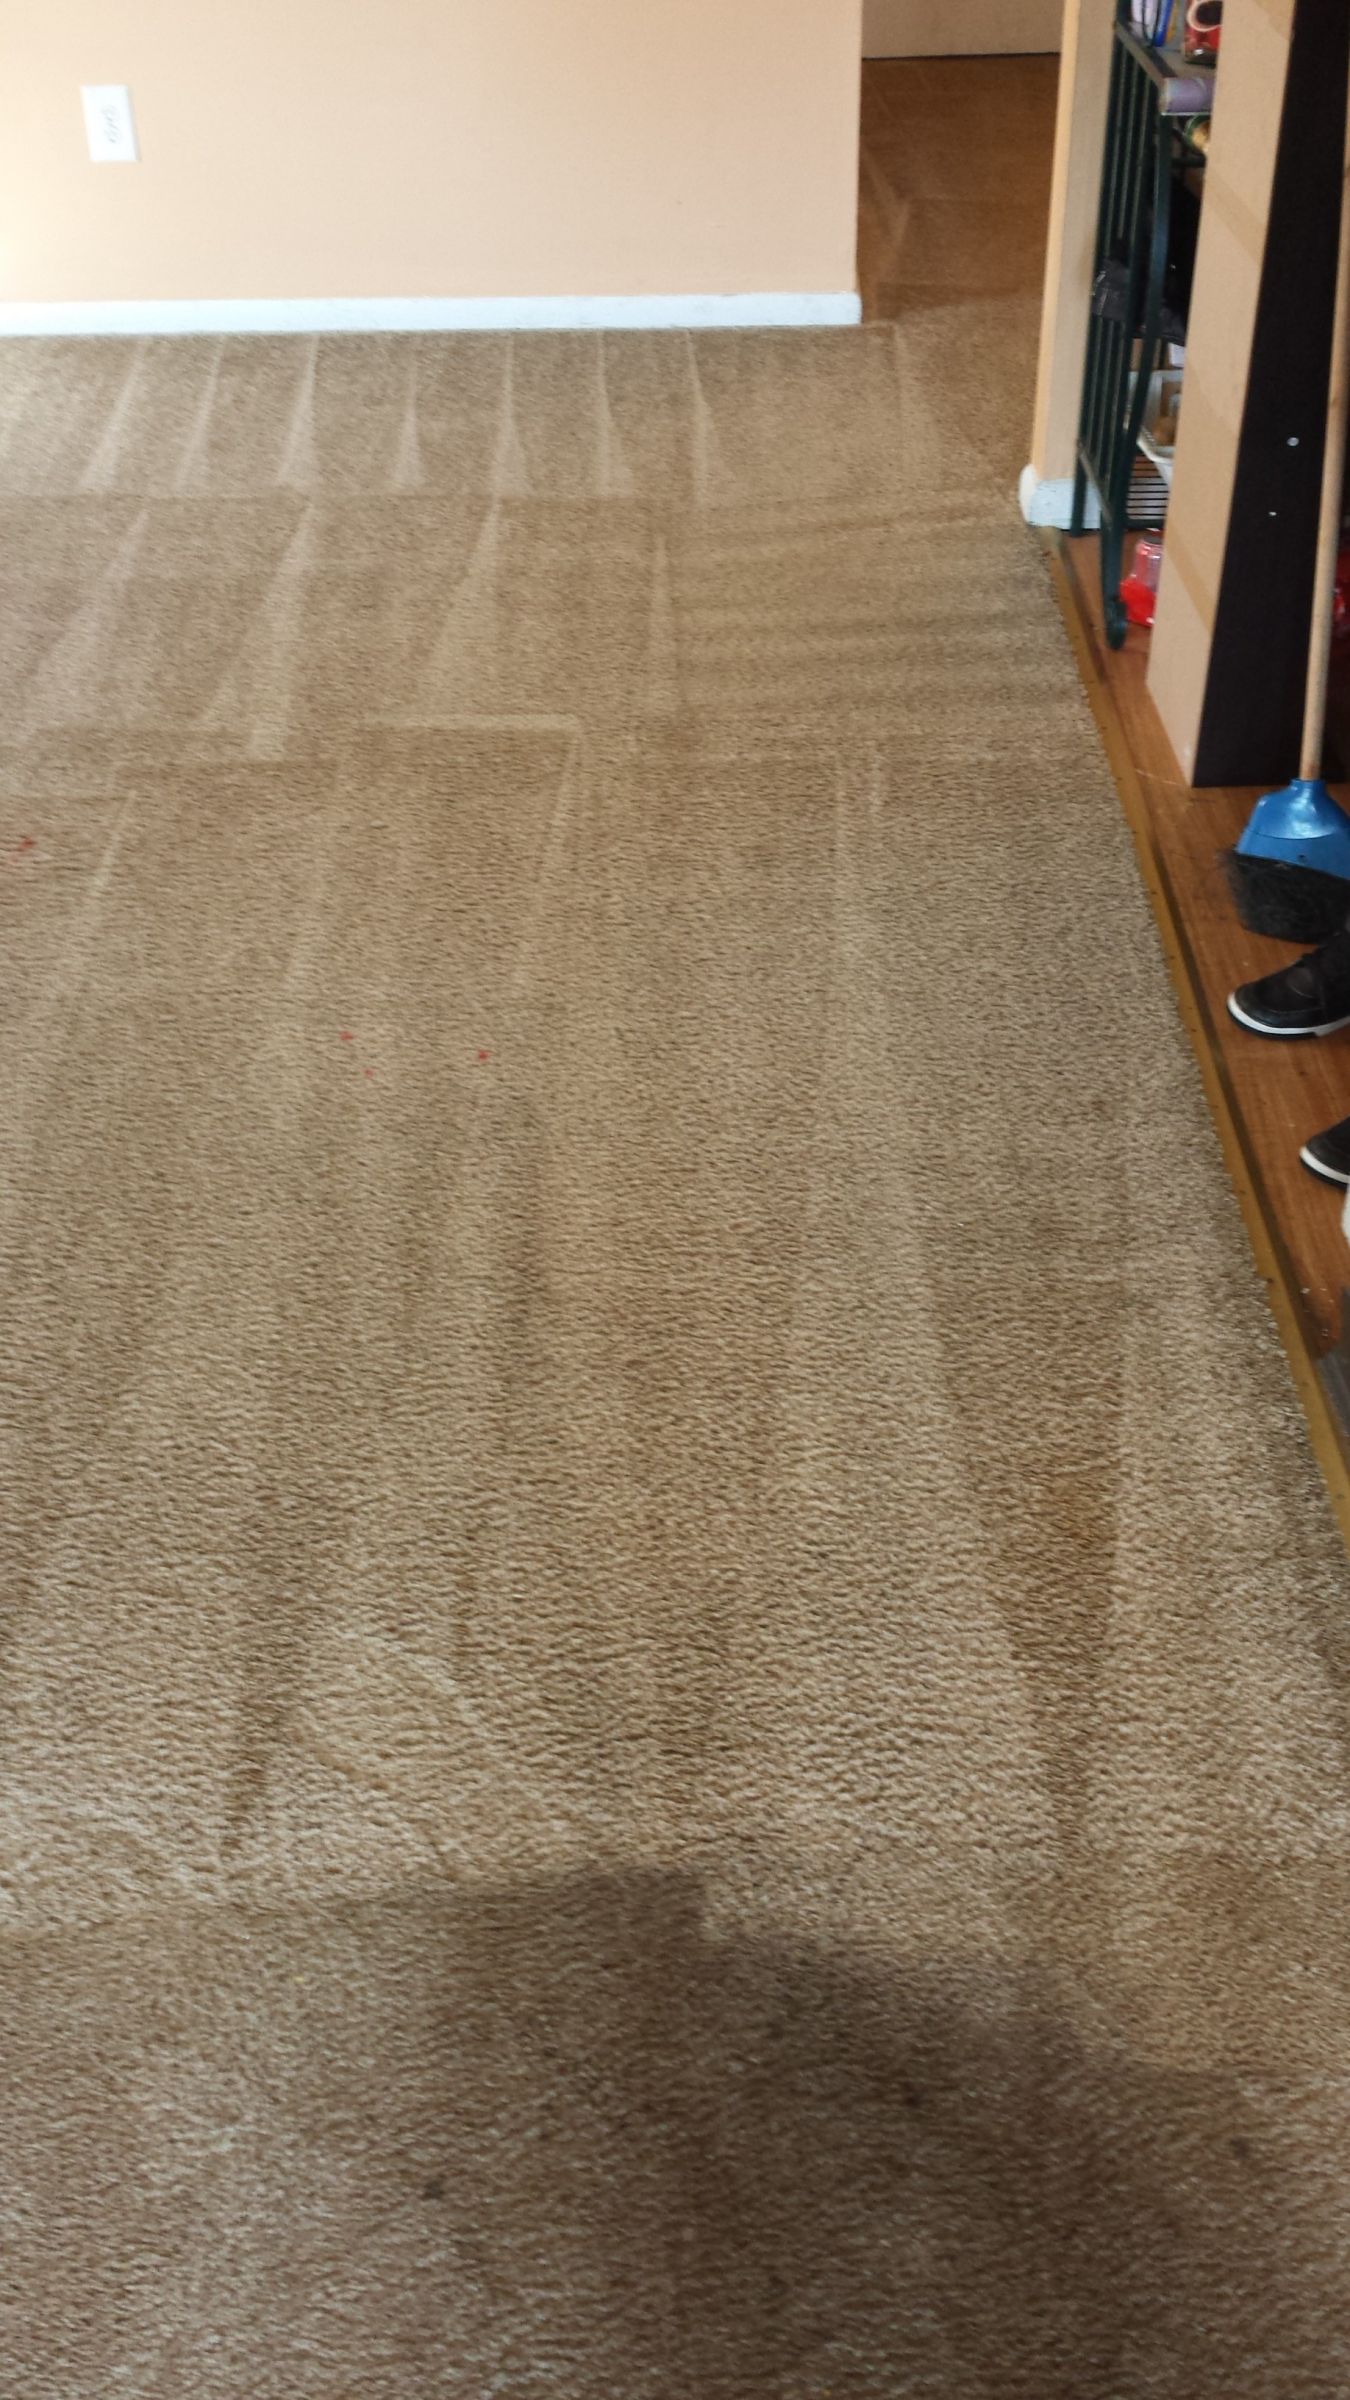 Get Help With Northbrook Carpet Cleaning Professionals